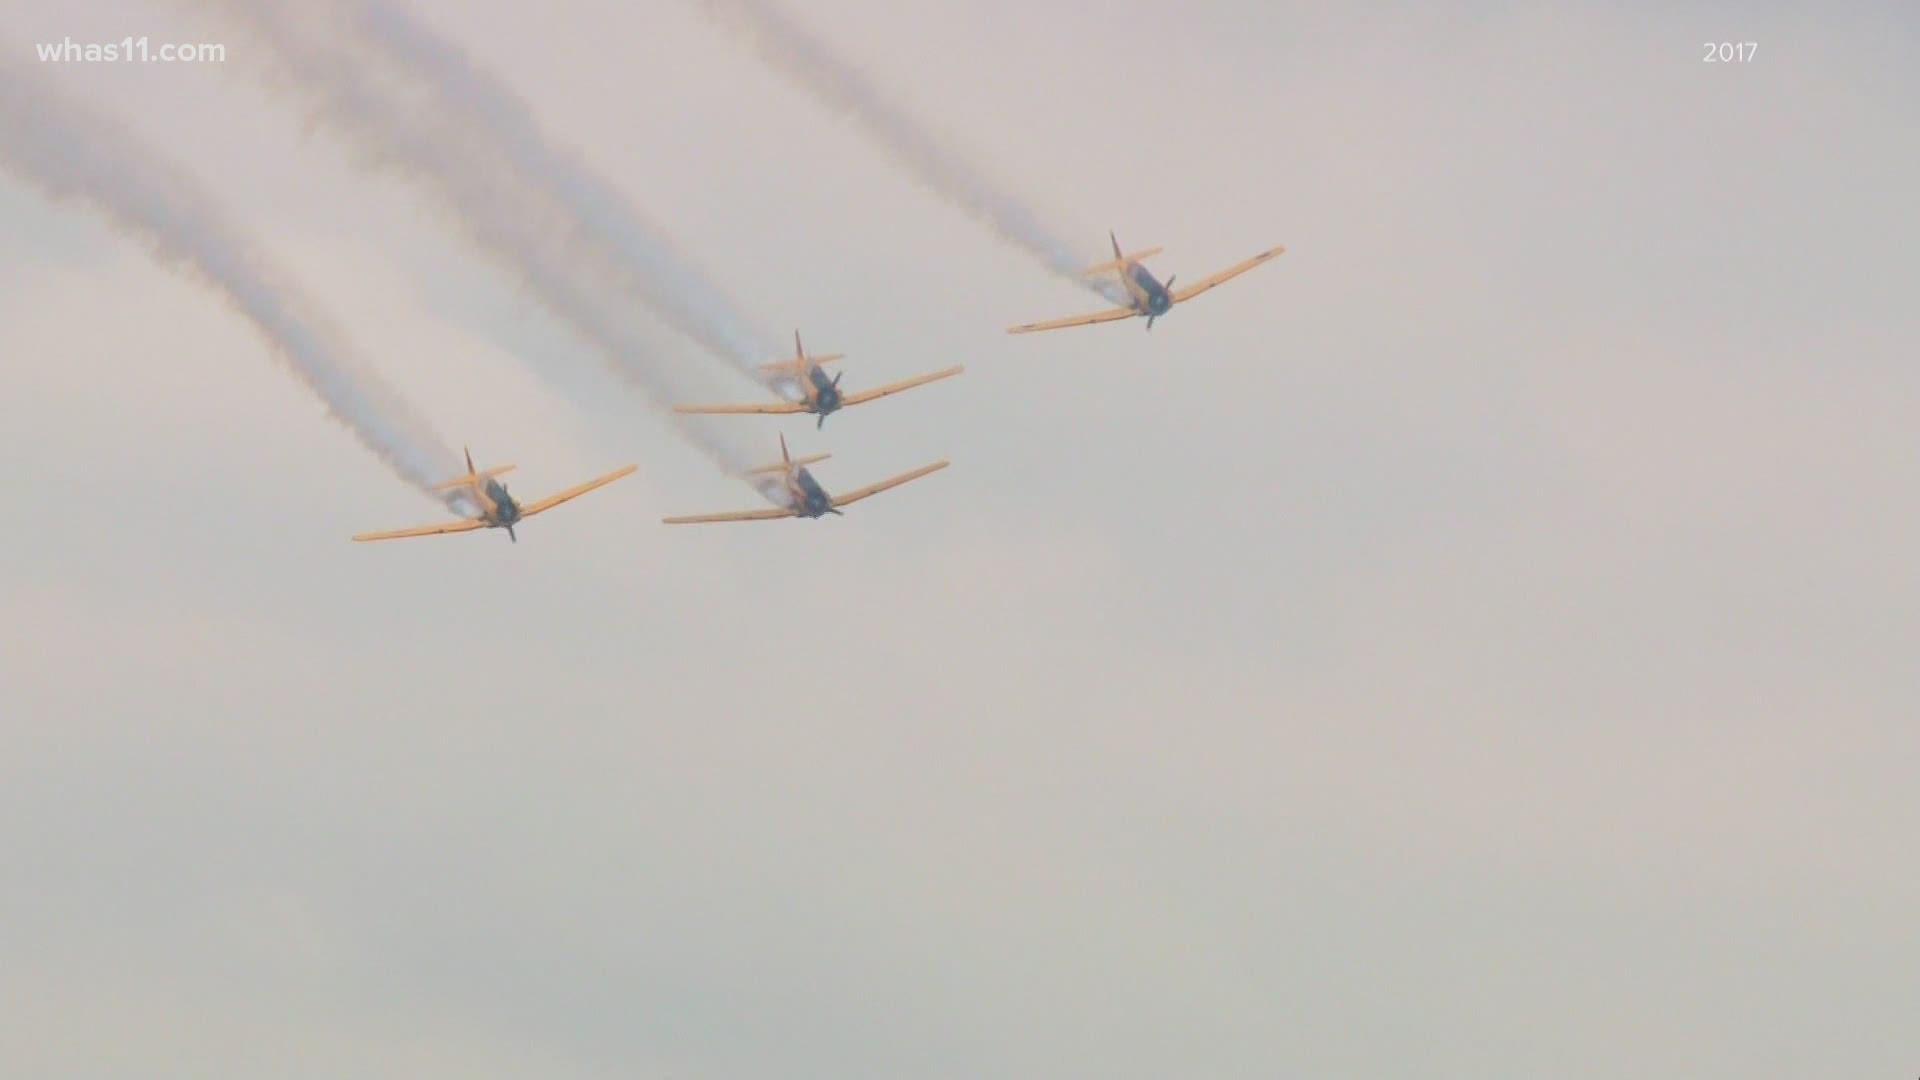 The decision to include an airshow and expand the celebration came in 1992. Here's why.